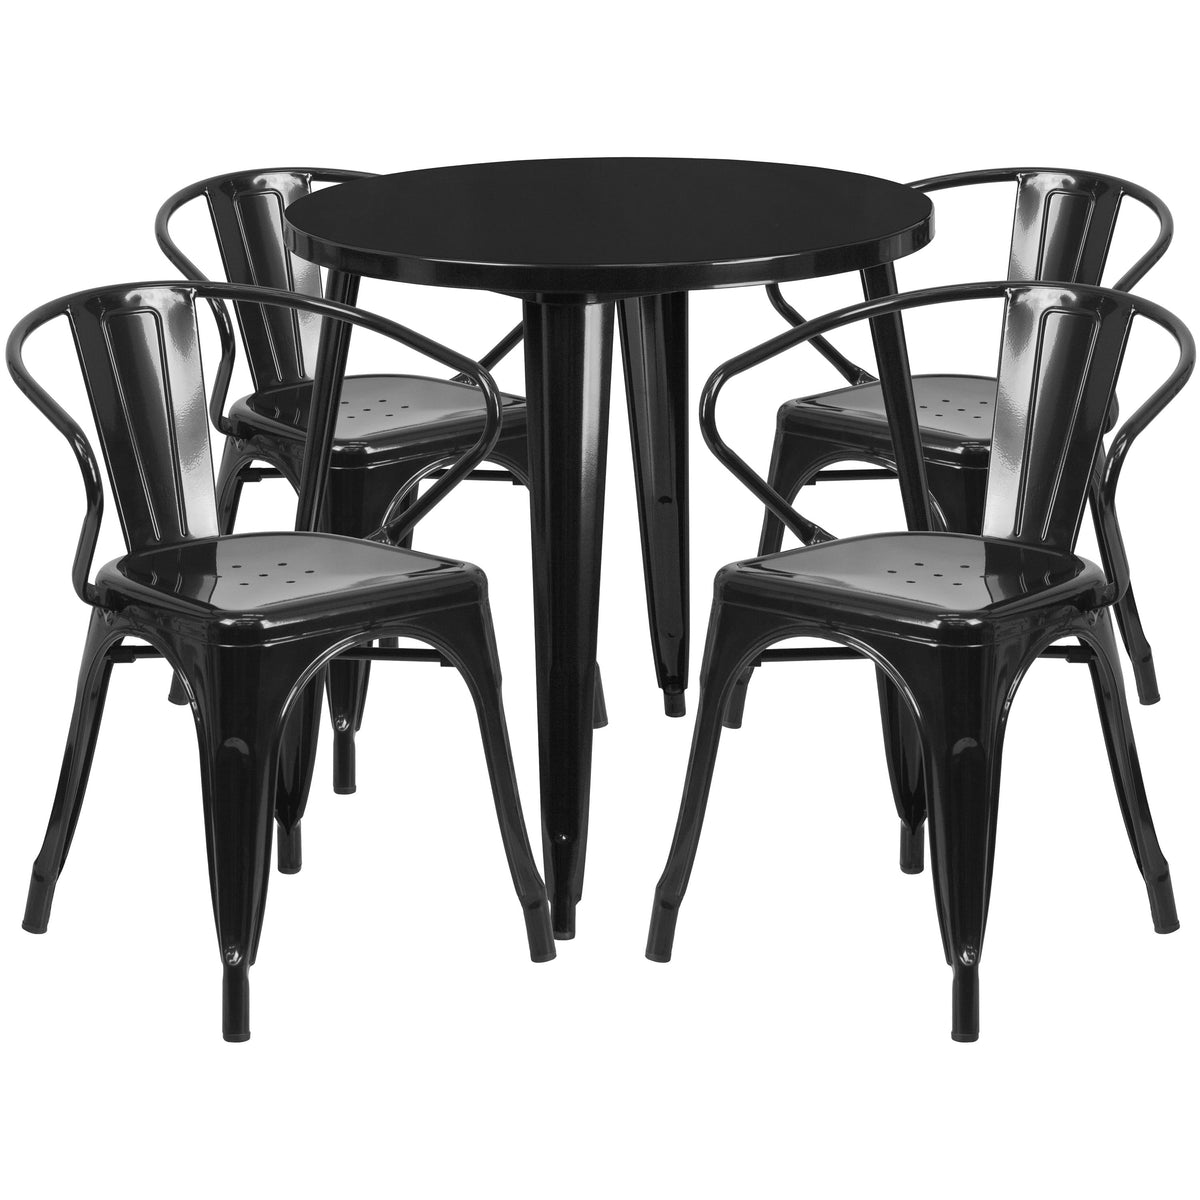 Black |#| 30inch Round Black Metal Indoor-Outdoor Table Set with 4 Arm Chairs